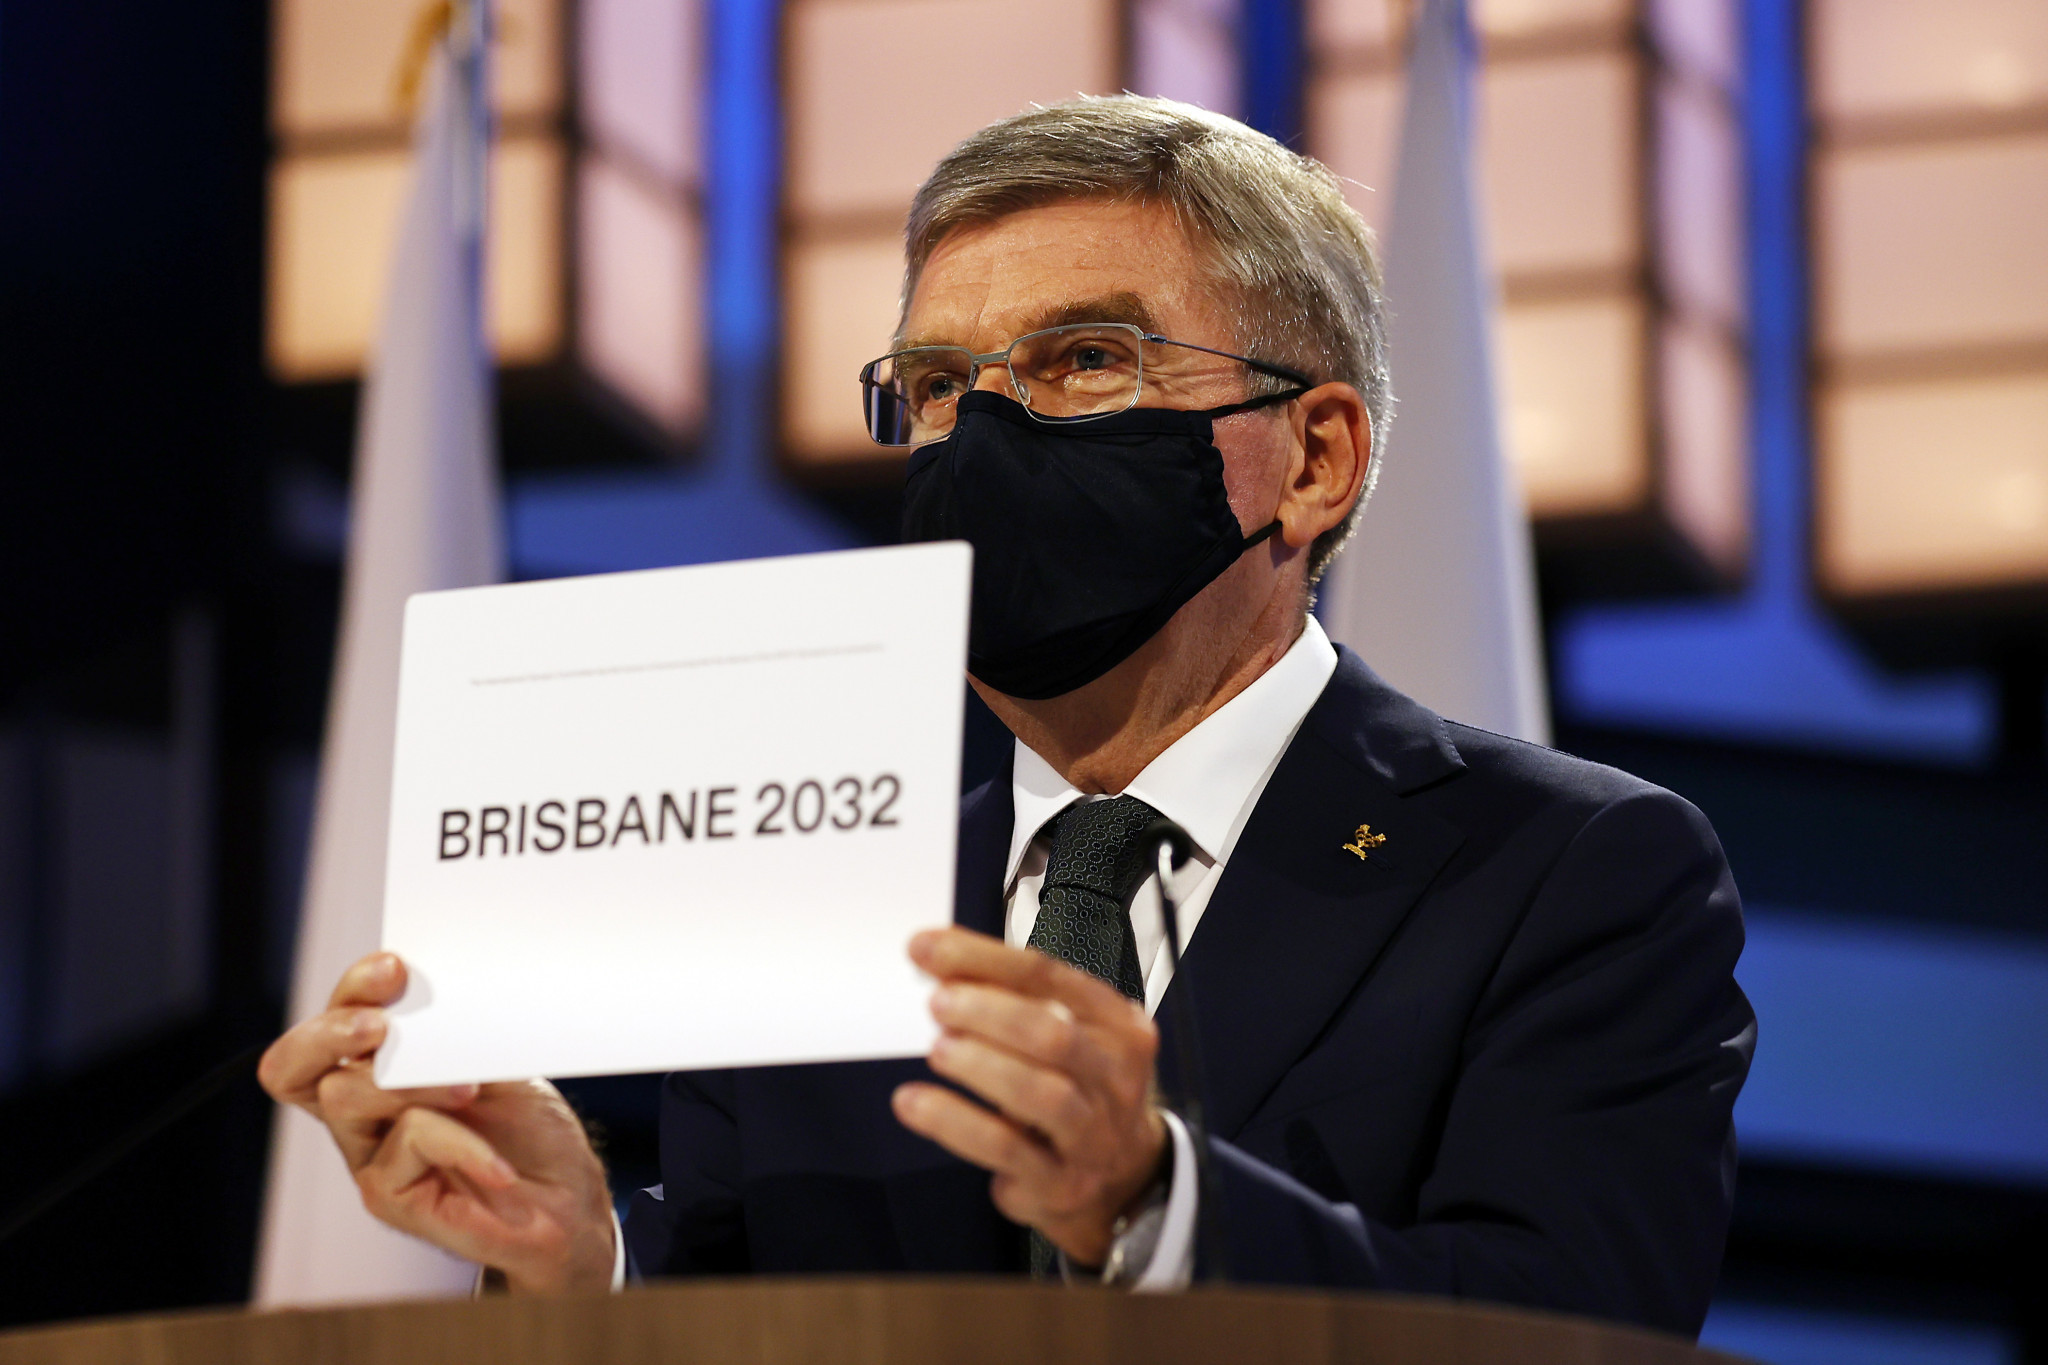 It is more than 14 months since Brisbane won the right to stage the Olympics and Paralympics, but a chief executive is yet to be hired ©Getty Images